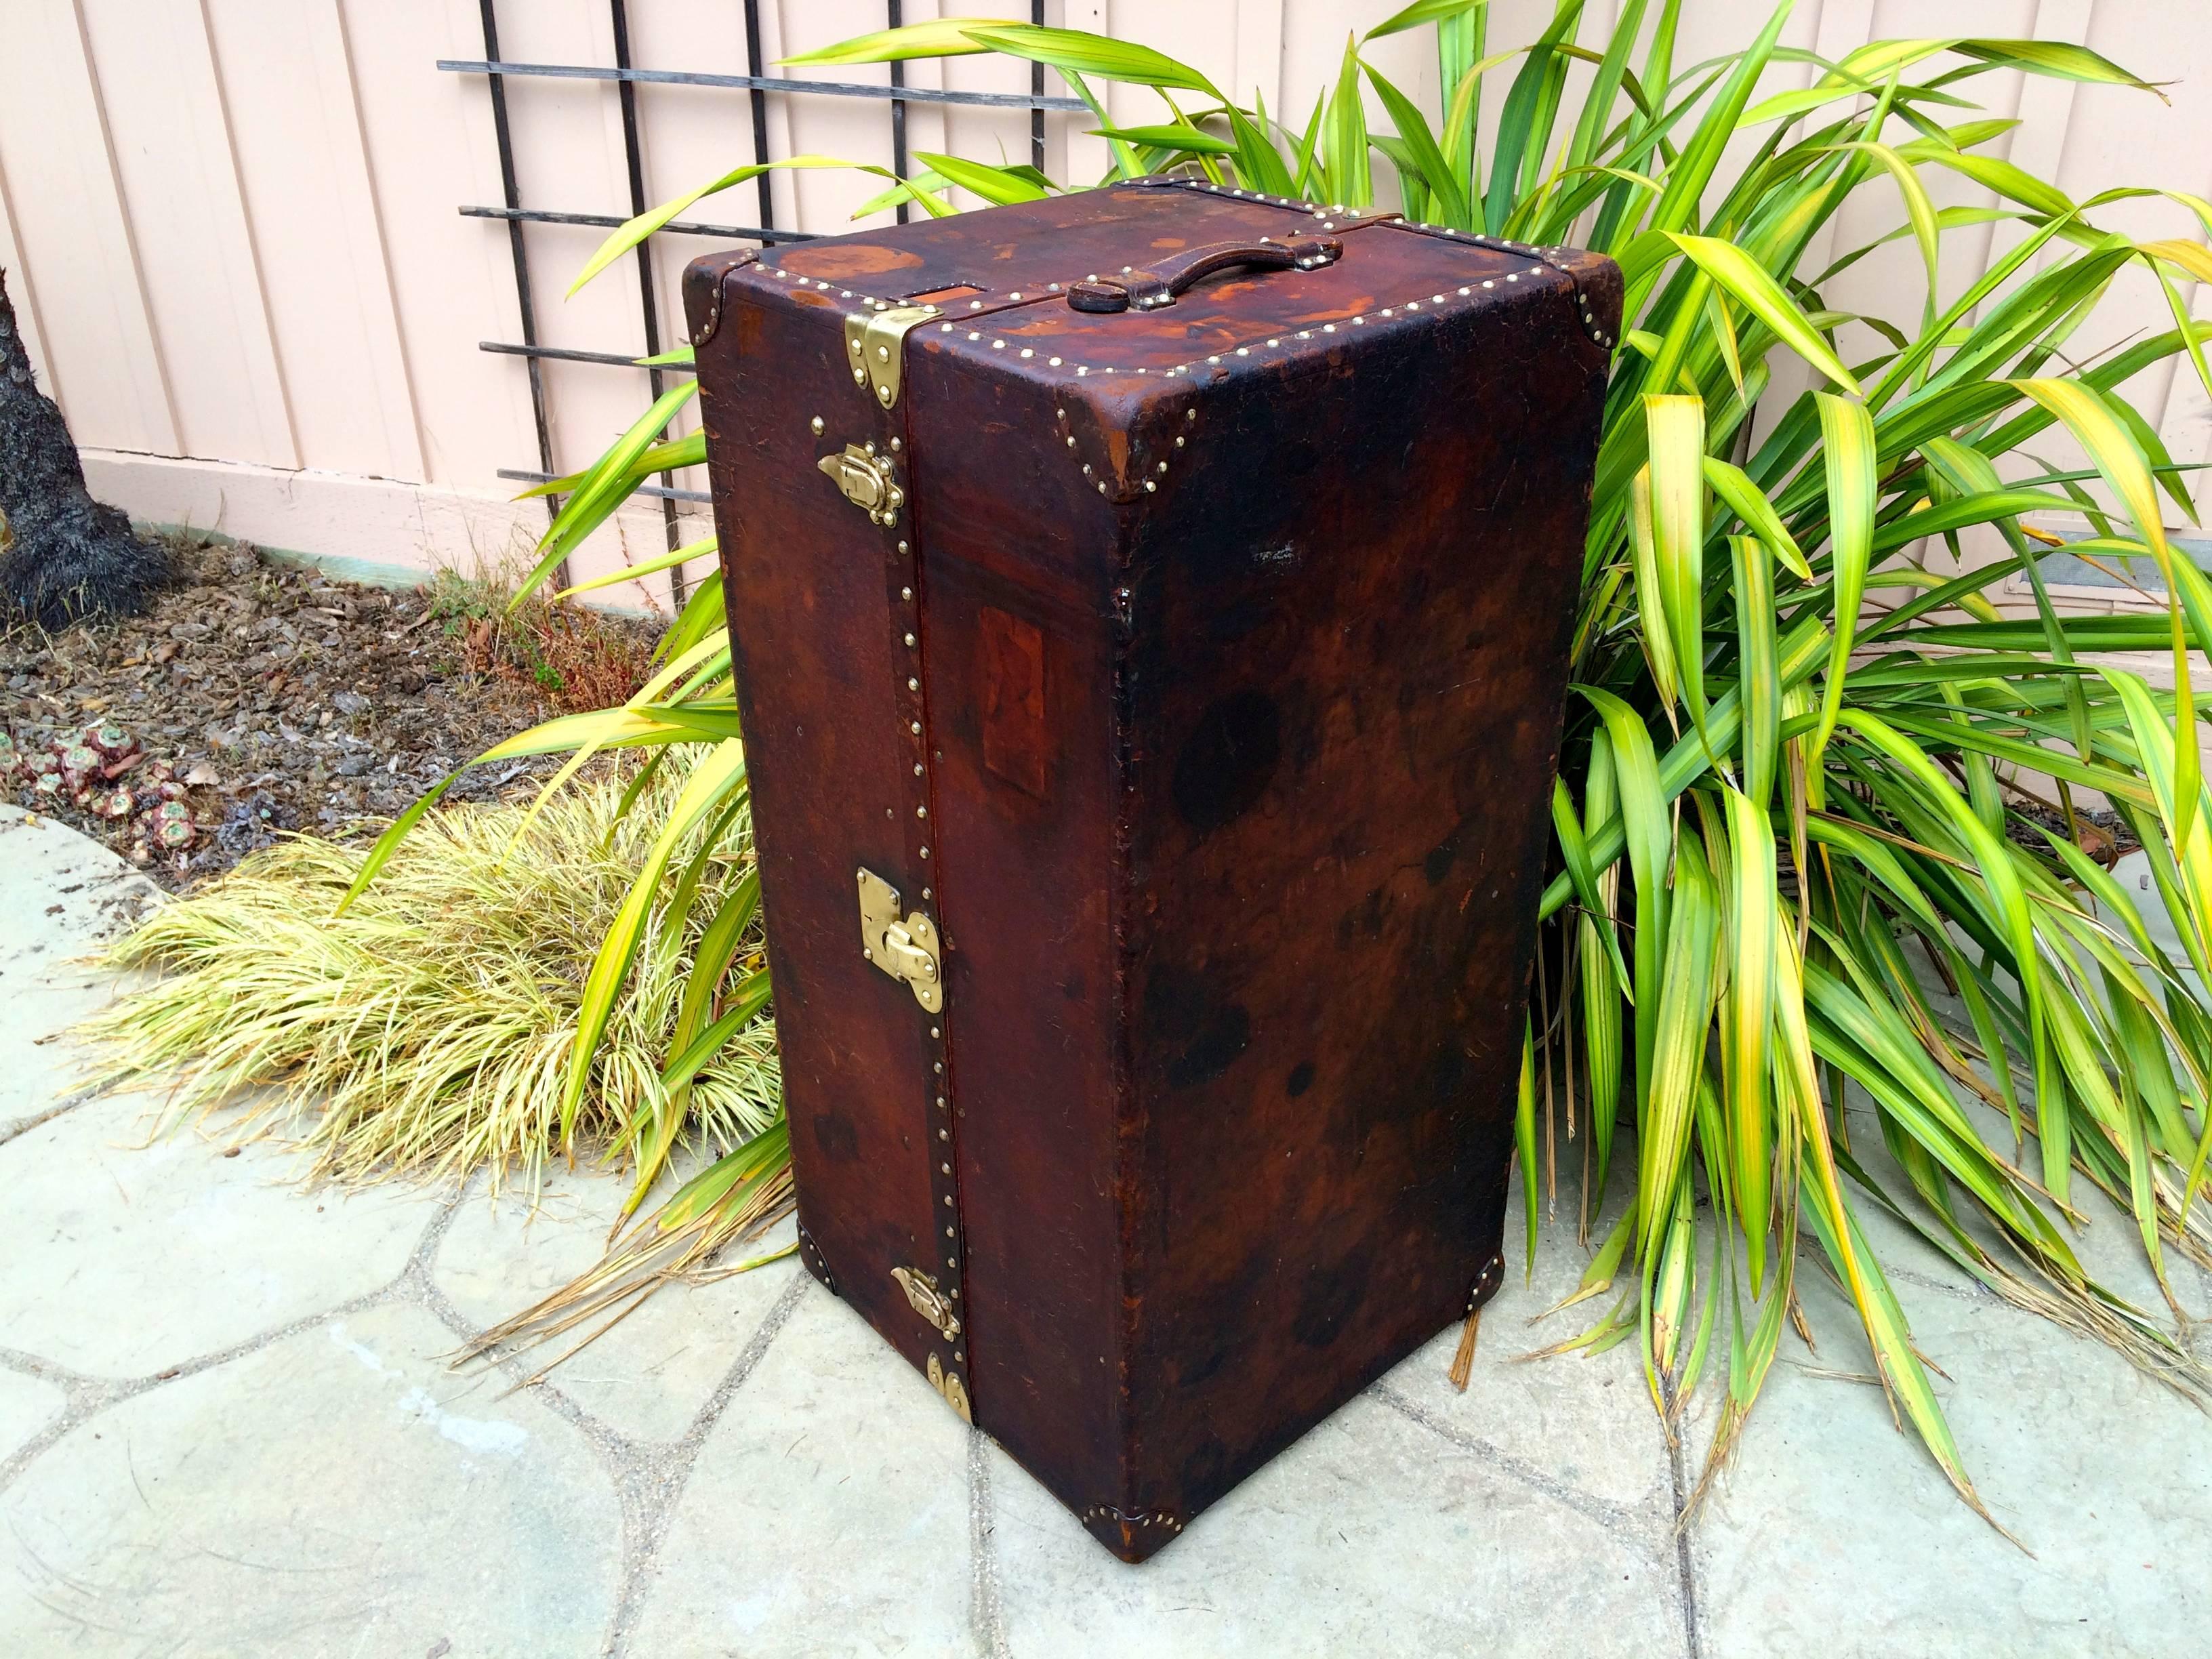 Louis Vuitton antique leather wardrobe steamer trunk. This trunk has all original pieces including interior and exterior with all original latches, handles, drawers and hangers. Interior is in spectacular condition with hangers and original drawers.